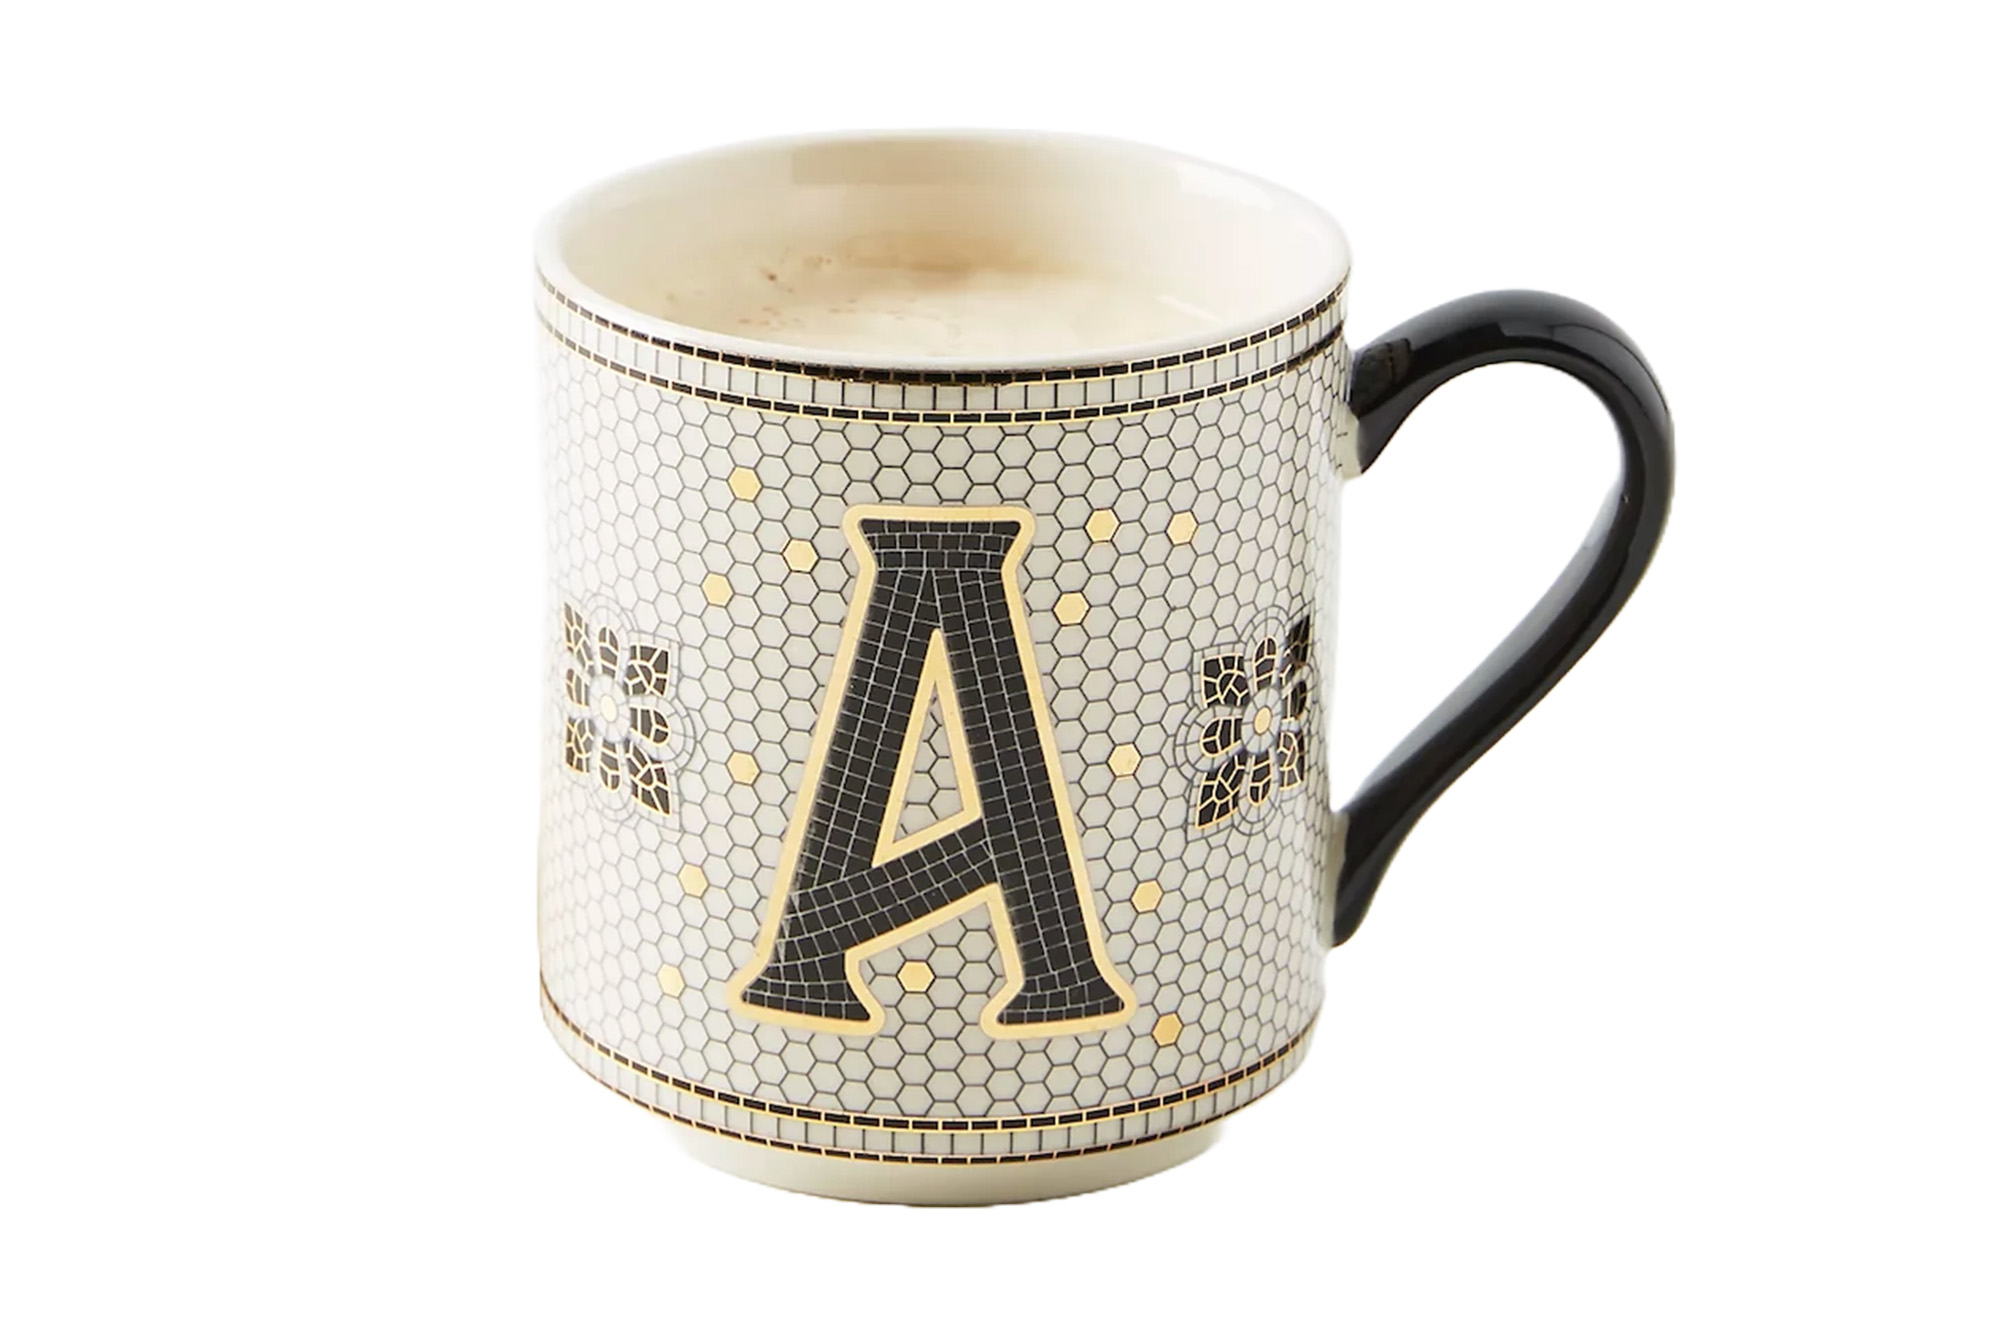 A mug with the letter A on it